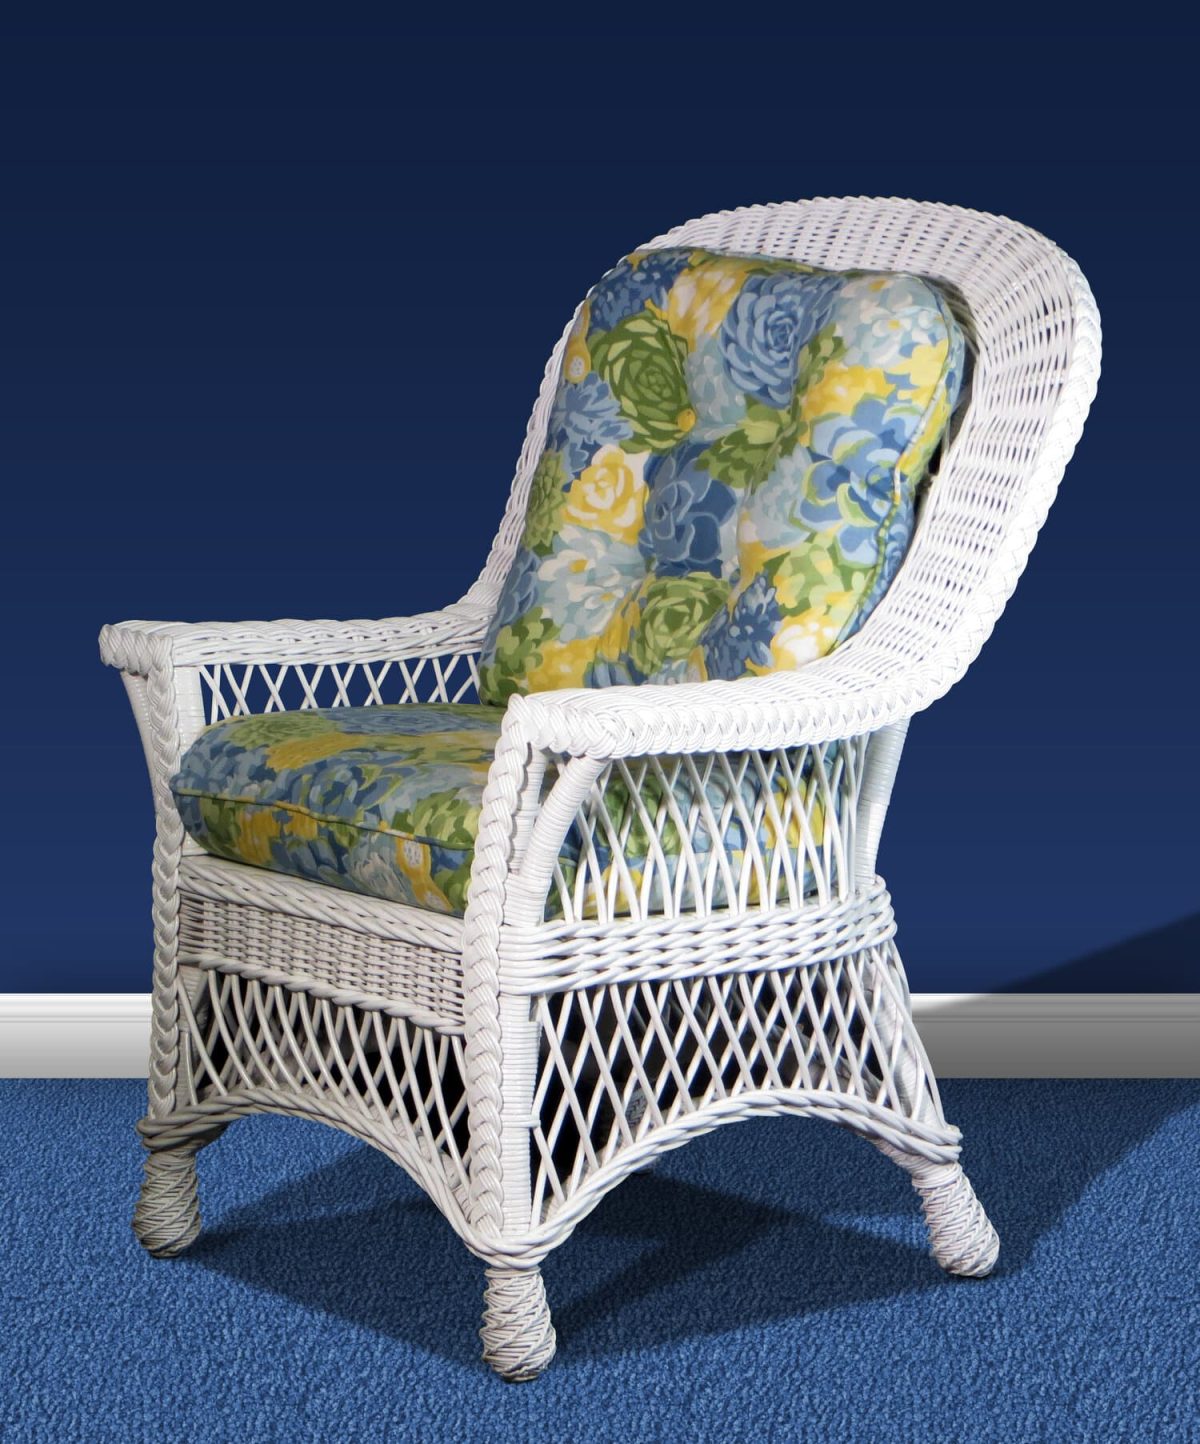 Bar Harbor White Rattan Dining Chair Model BHAC-w from Spice Island Wicker